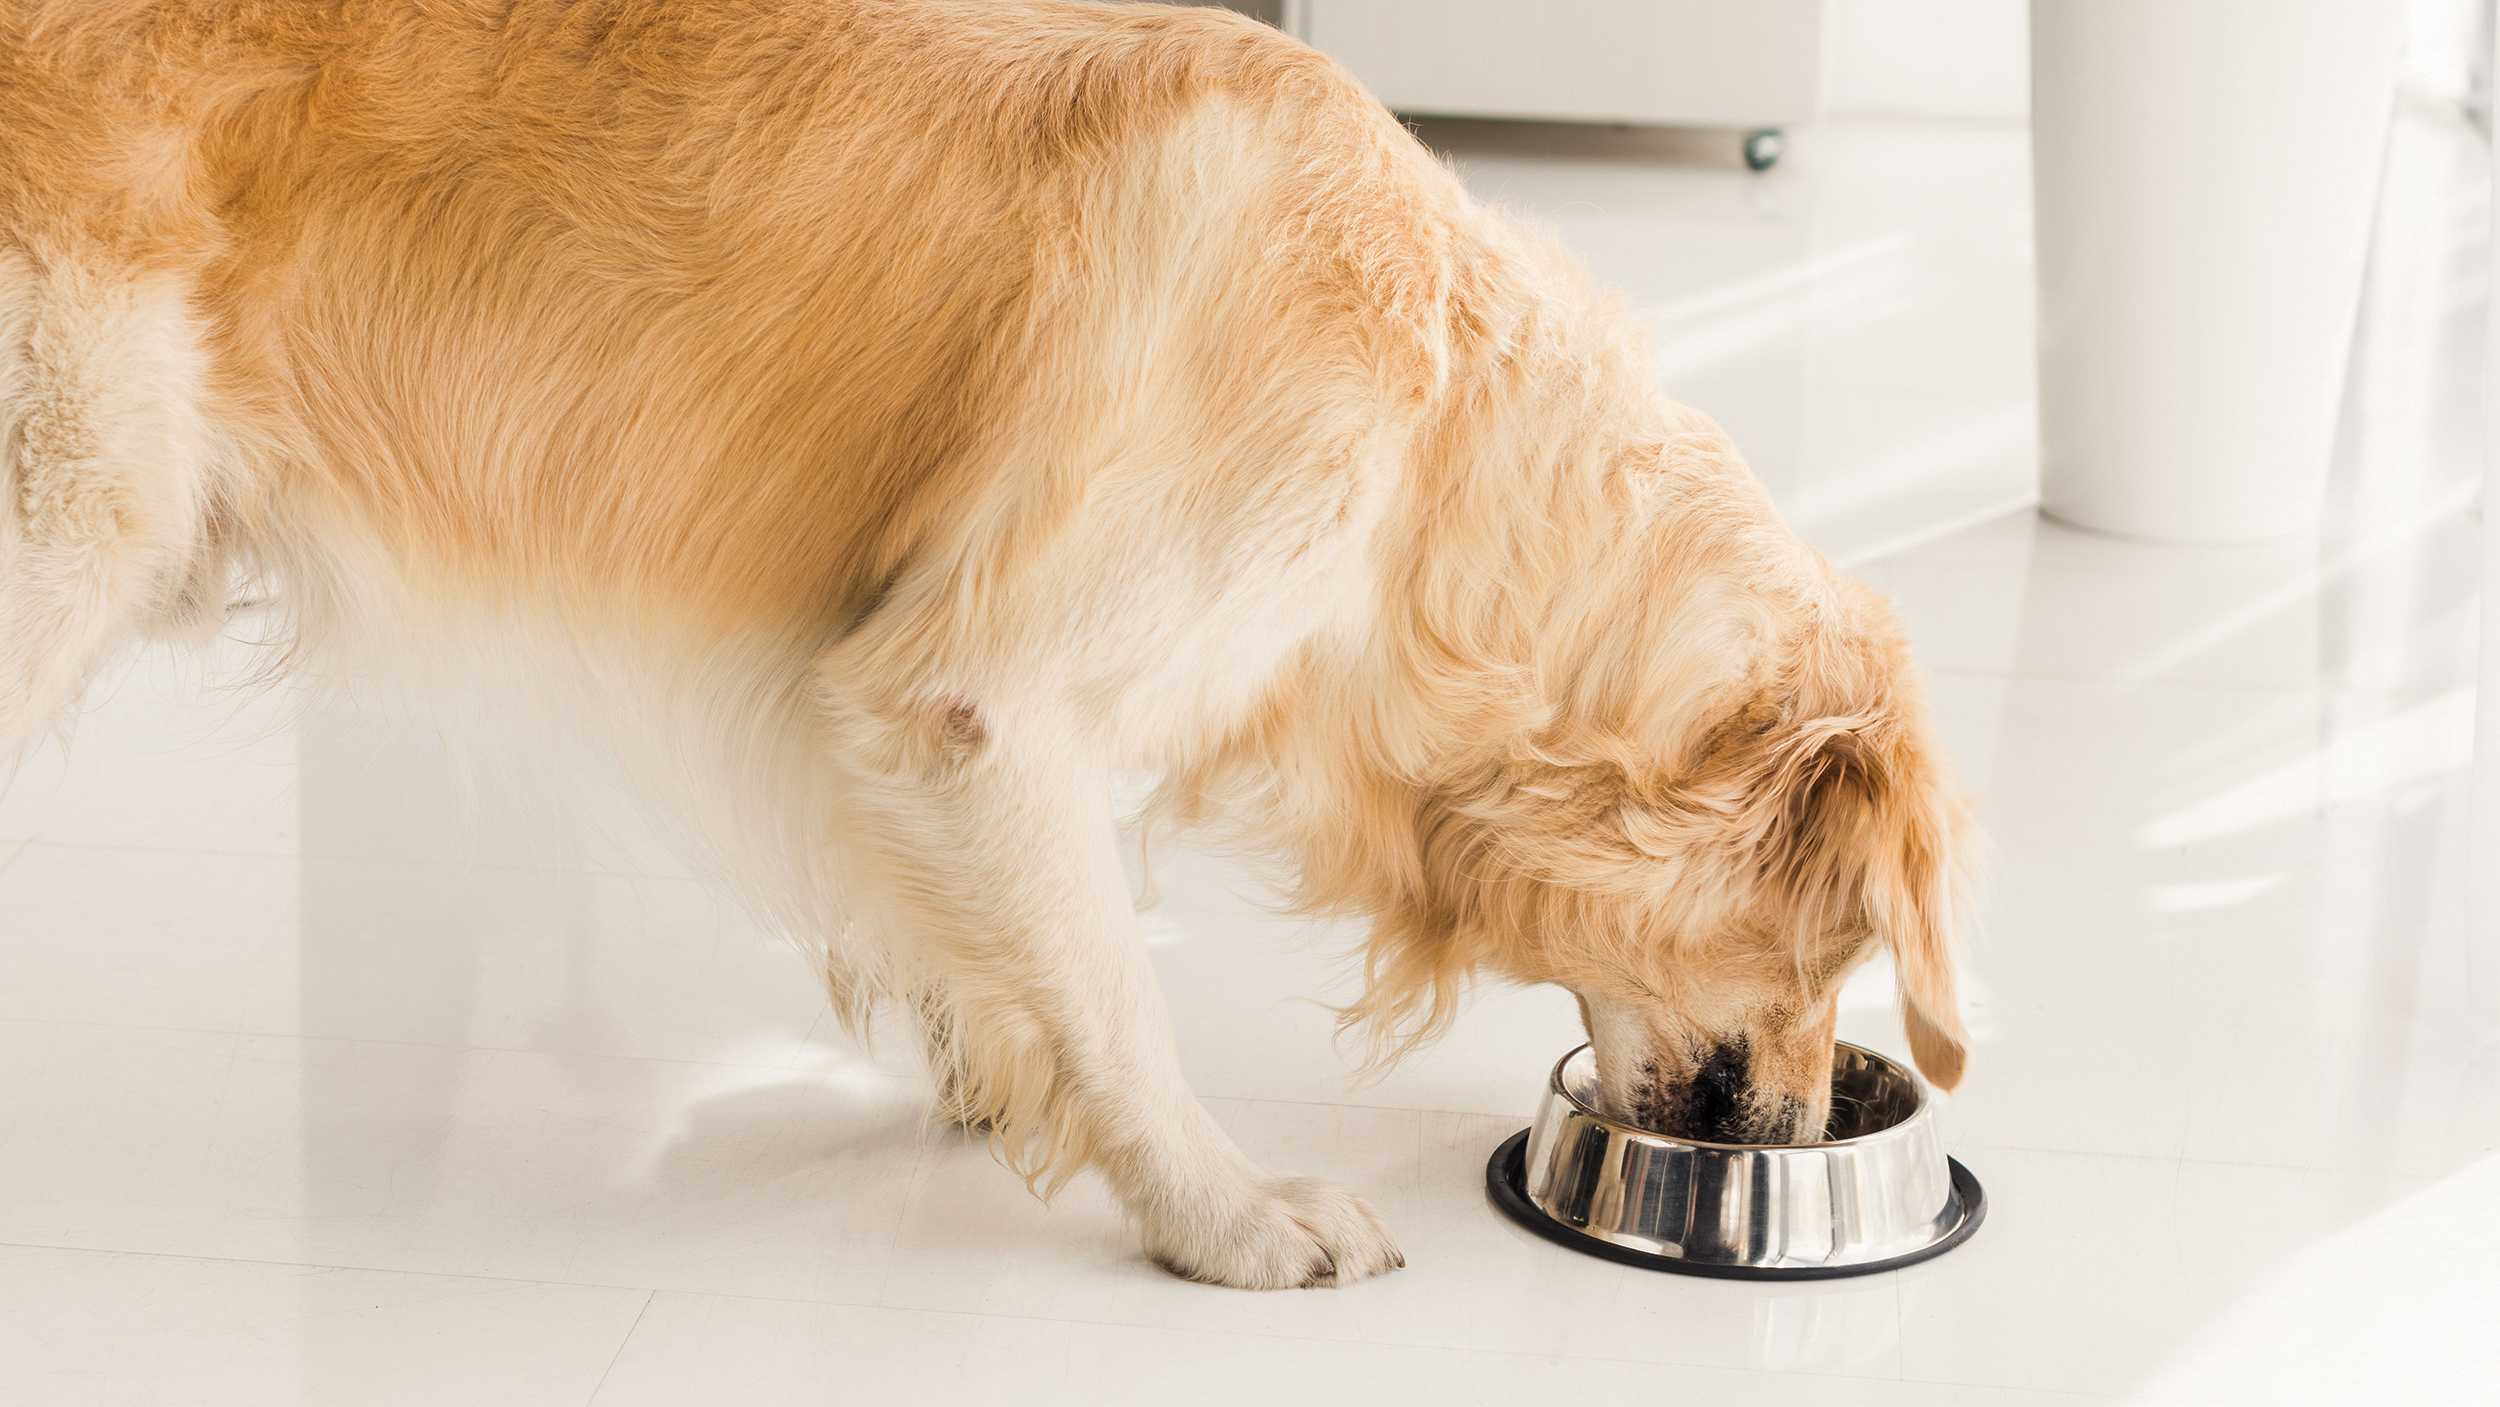 Golden Retriever adult eating from a silver bowl in a white kitchen.